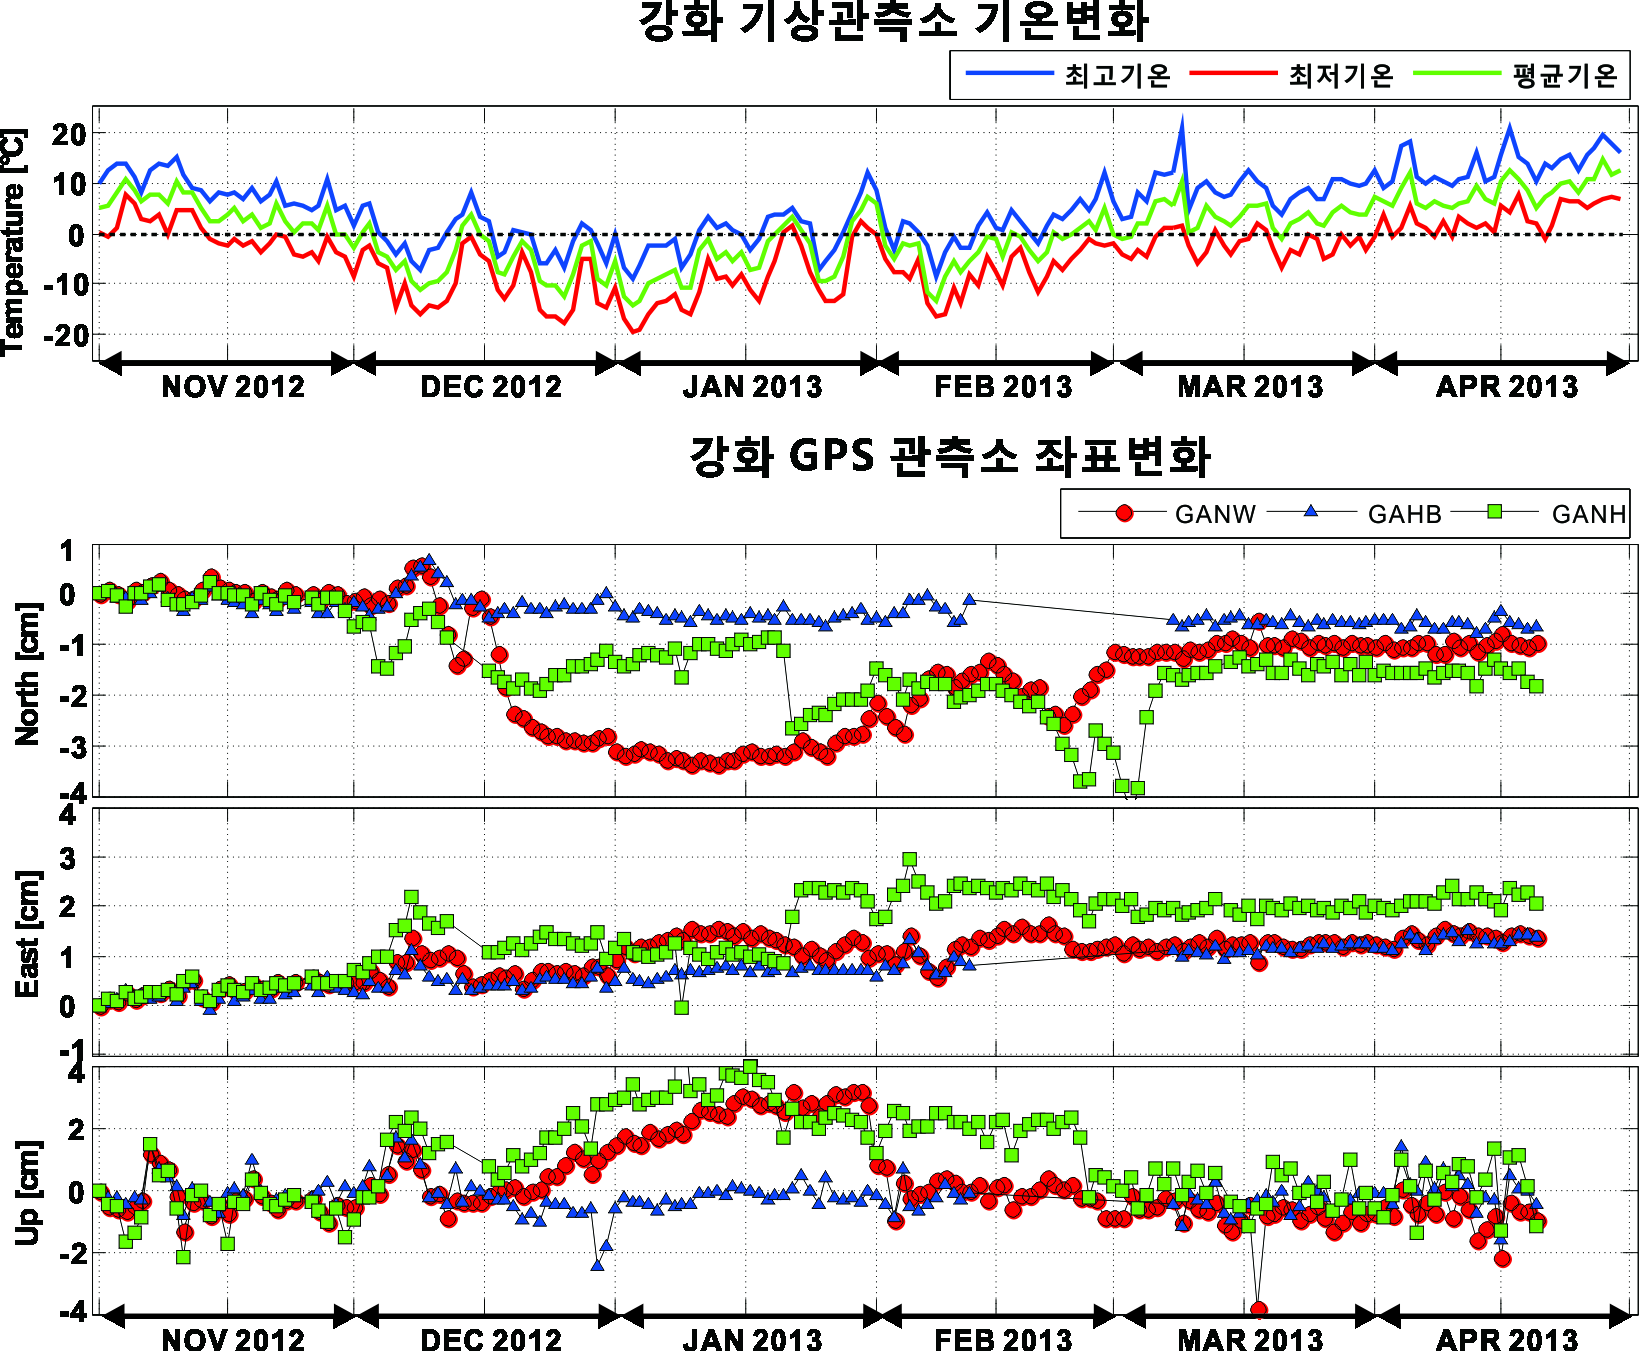 Fig. 3.4.4 Time seriese analysis of three GPS stations installed at Gangwha meteorological observatory